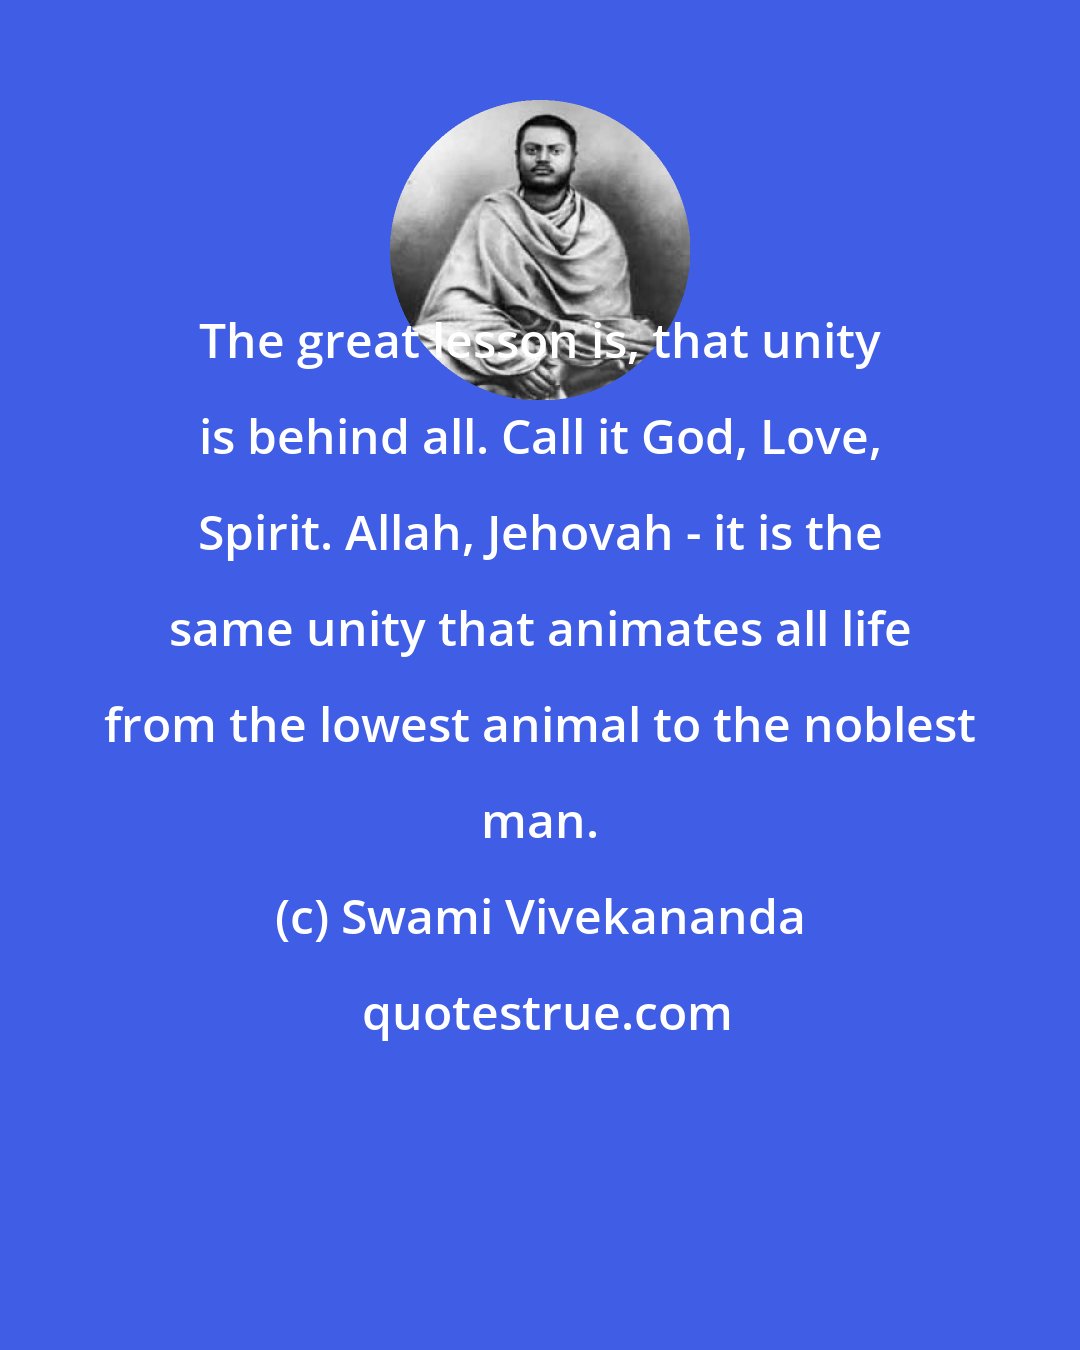 Swami Vivekananda: The great lesson is, that unity is behind all. Call it God, Love, Spirit. Allah, Jehovah - it is the same unity that animates all life from the lowest animal to the noblest man.